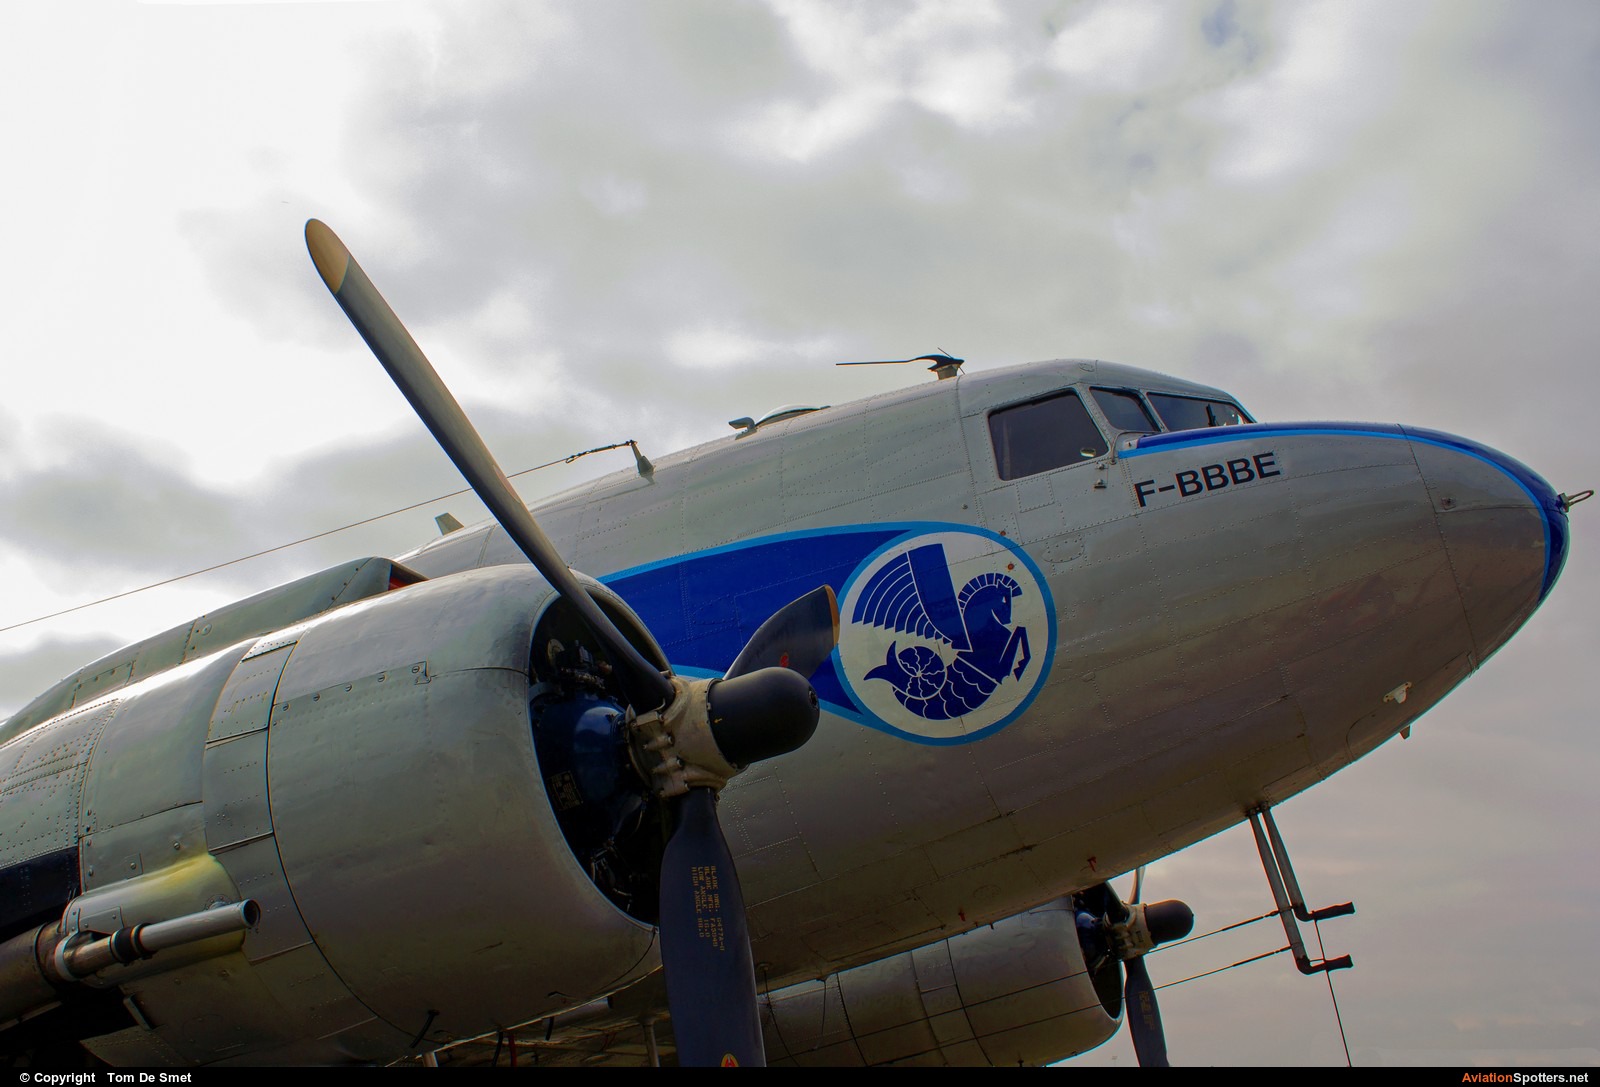 Air France  -  DC-3  (F-BBBE) By Tom De Smet (Tommer)